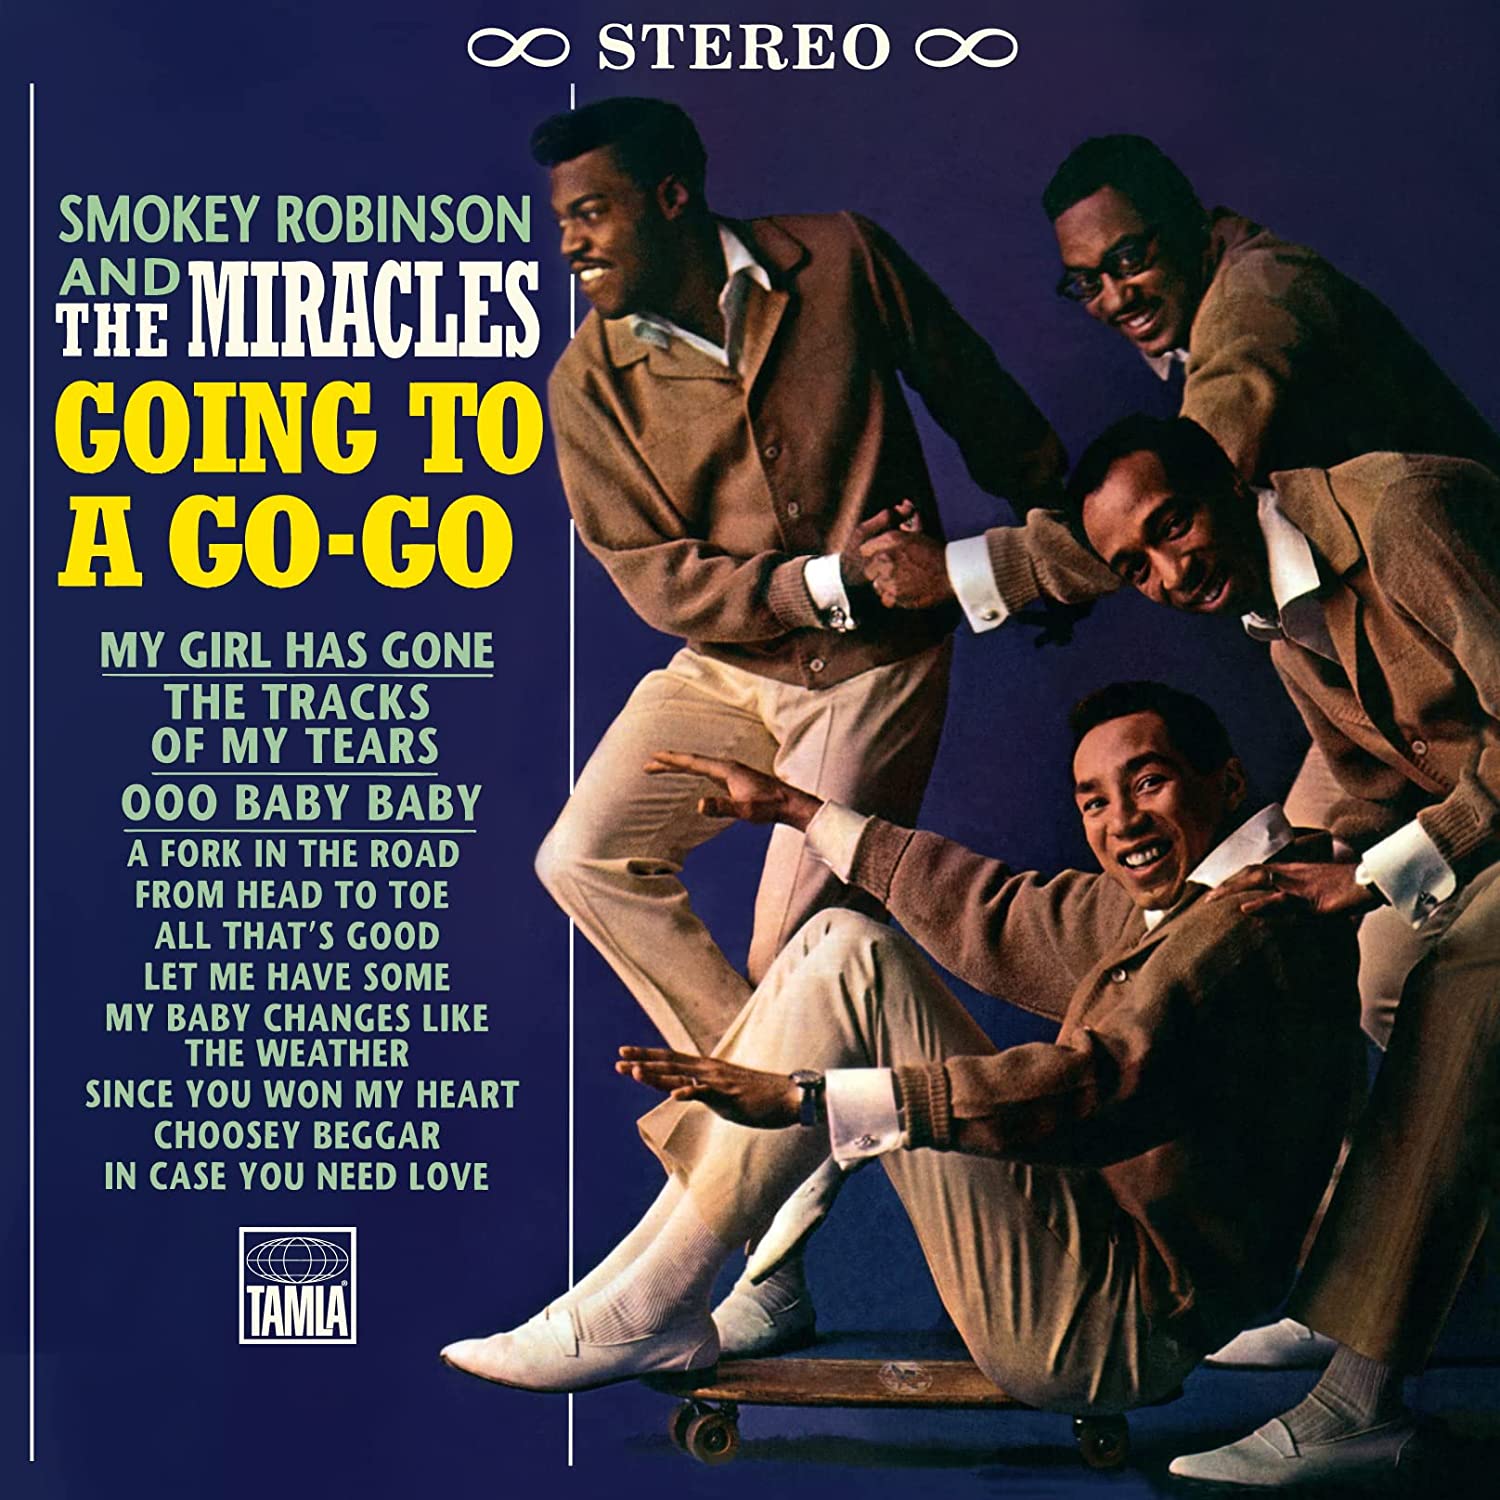 Smokey Robinson And The Miracles Going To A Go-Go - Ireland Vinyl